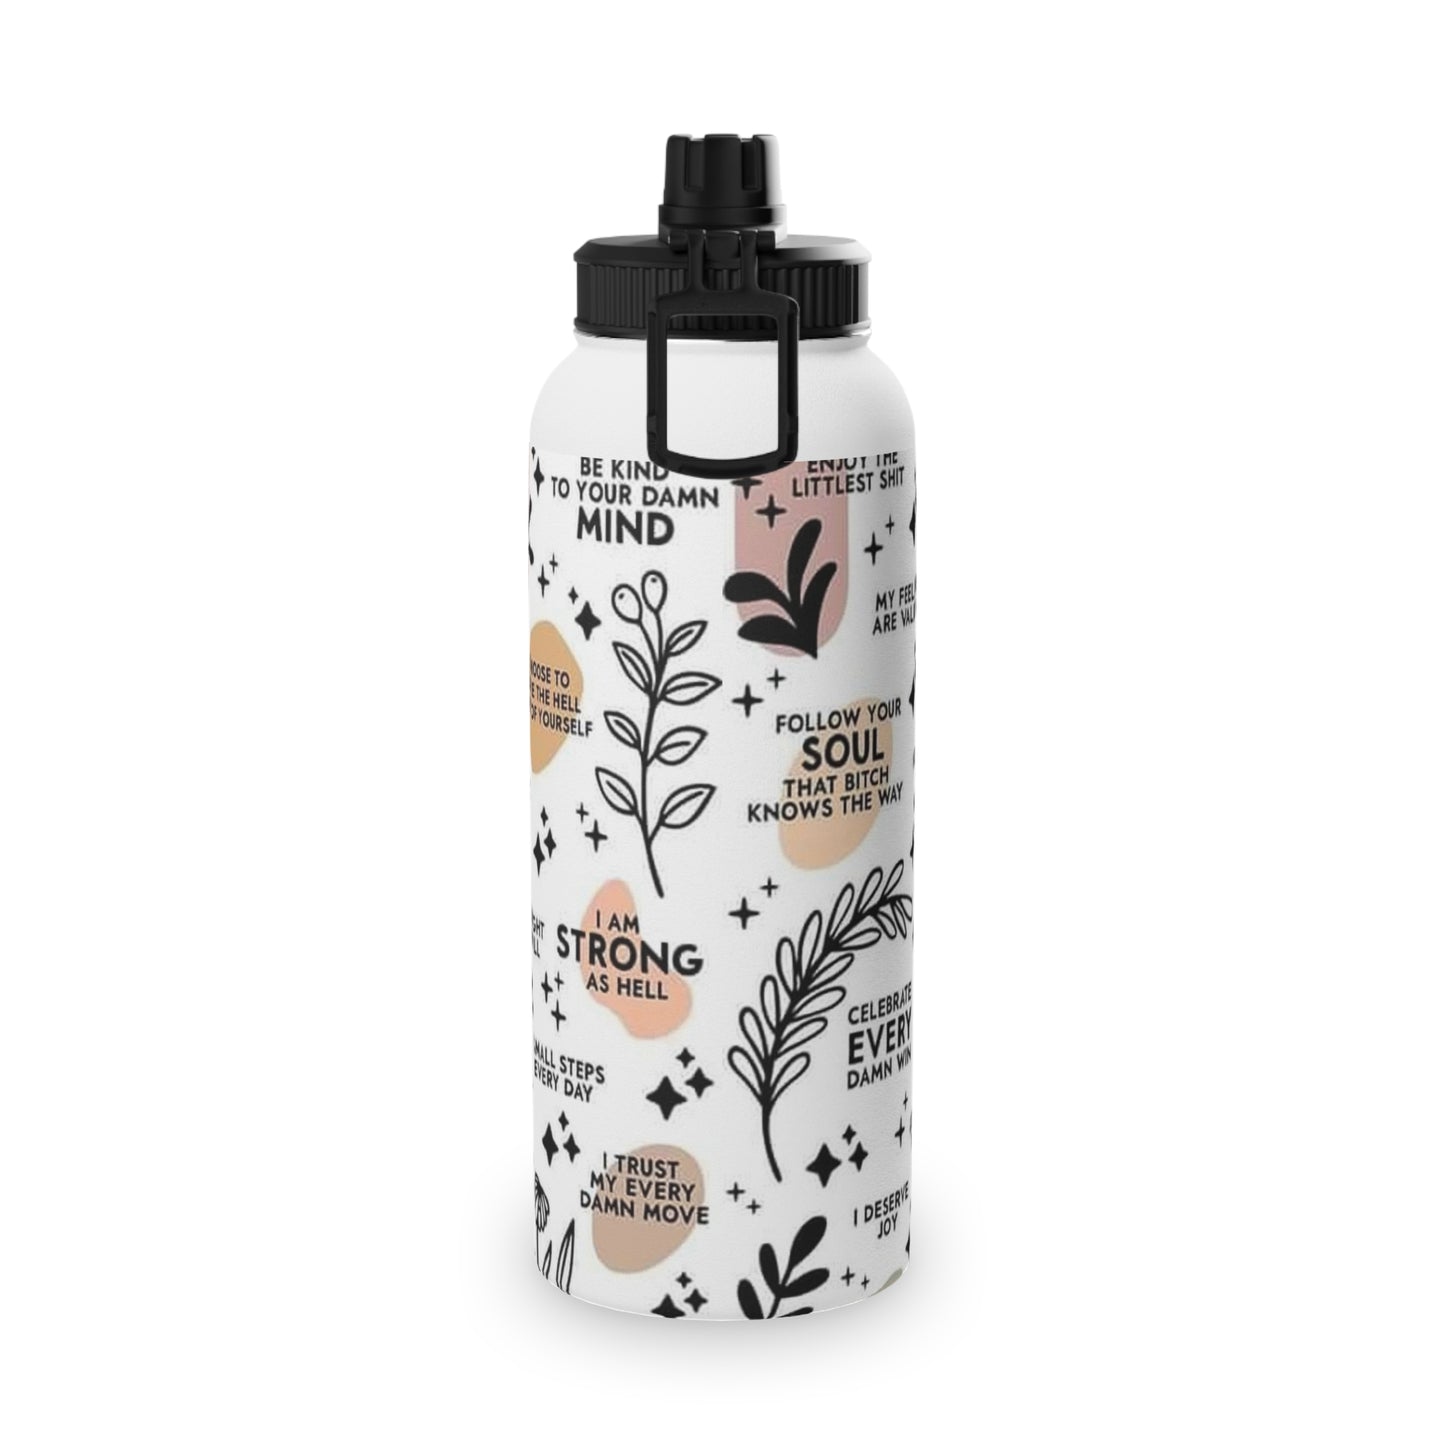 Daily Affirmation Reminder Stainless Steel Water Bottle, Sports Lid